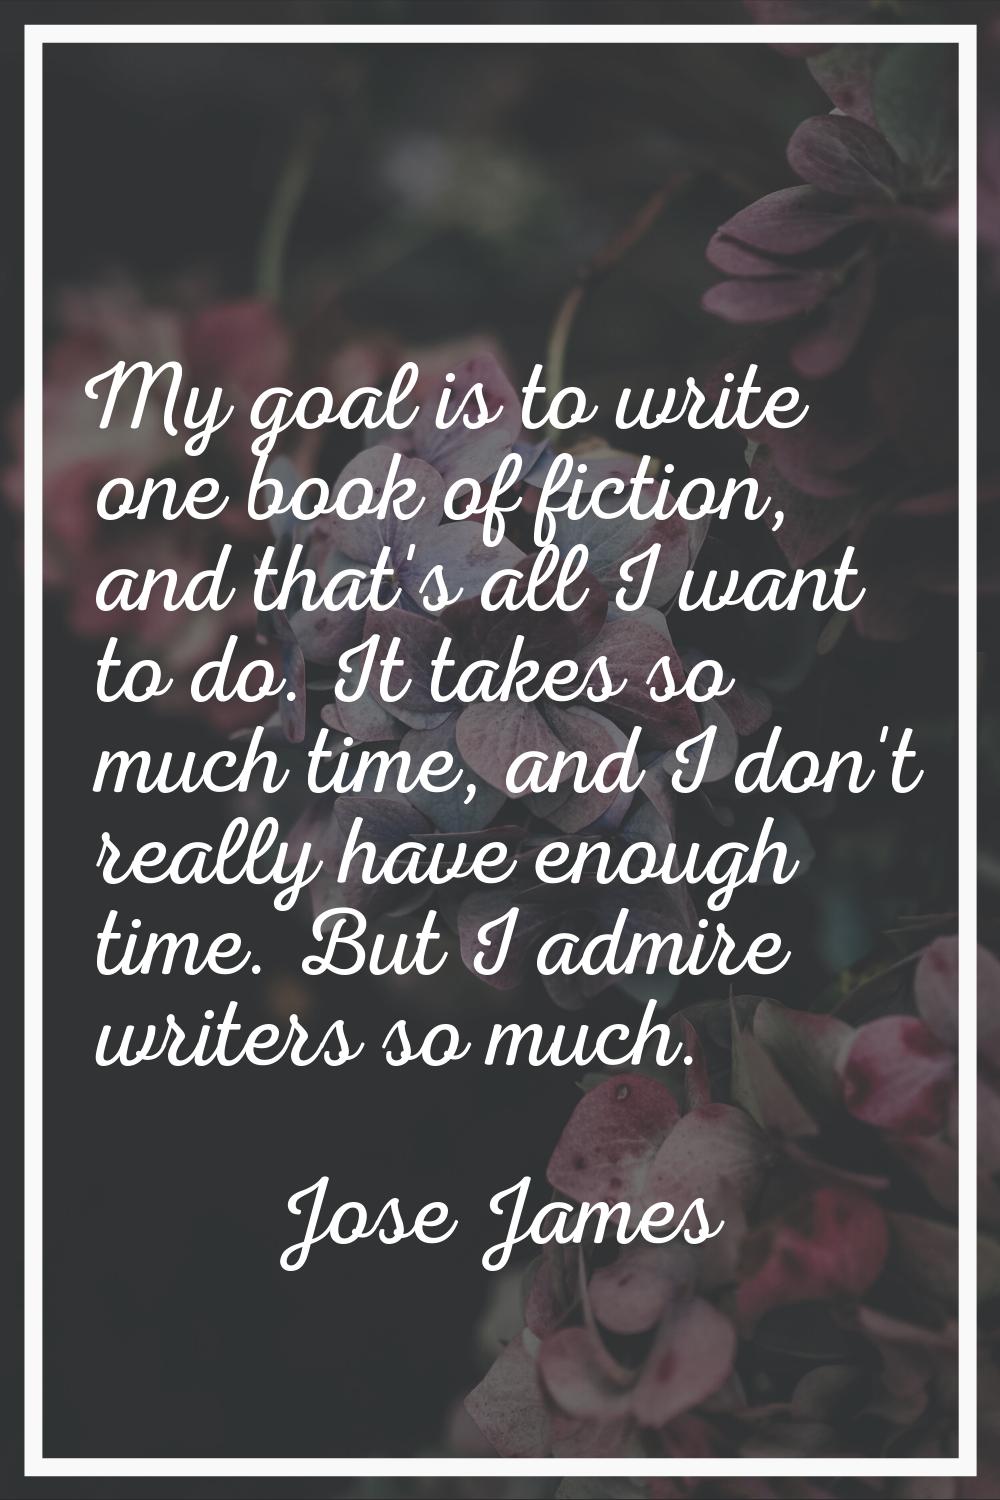 My goal is to write one book of fiction, and that's all I want to do. It takes so much time, and I 